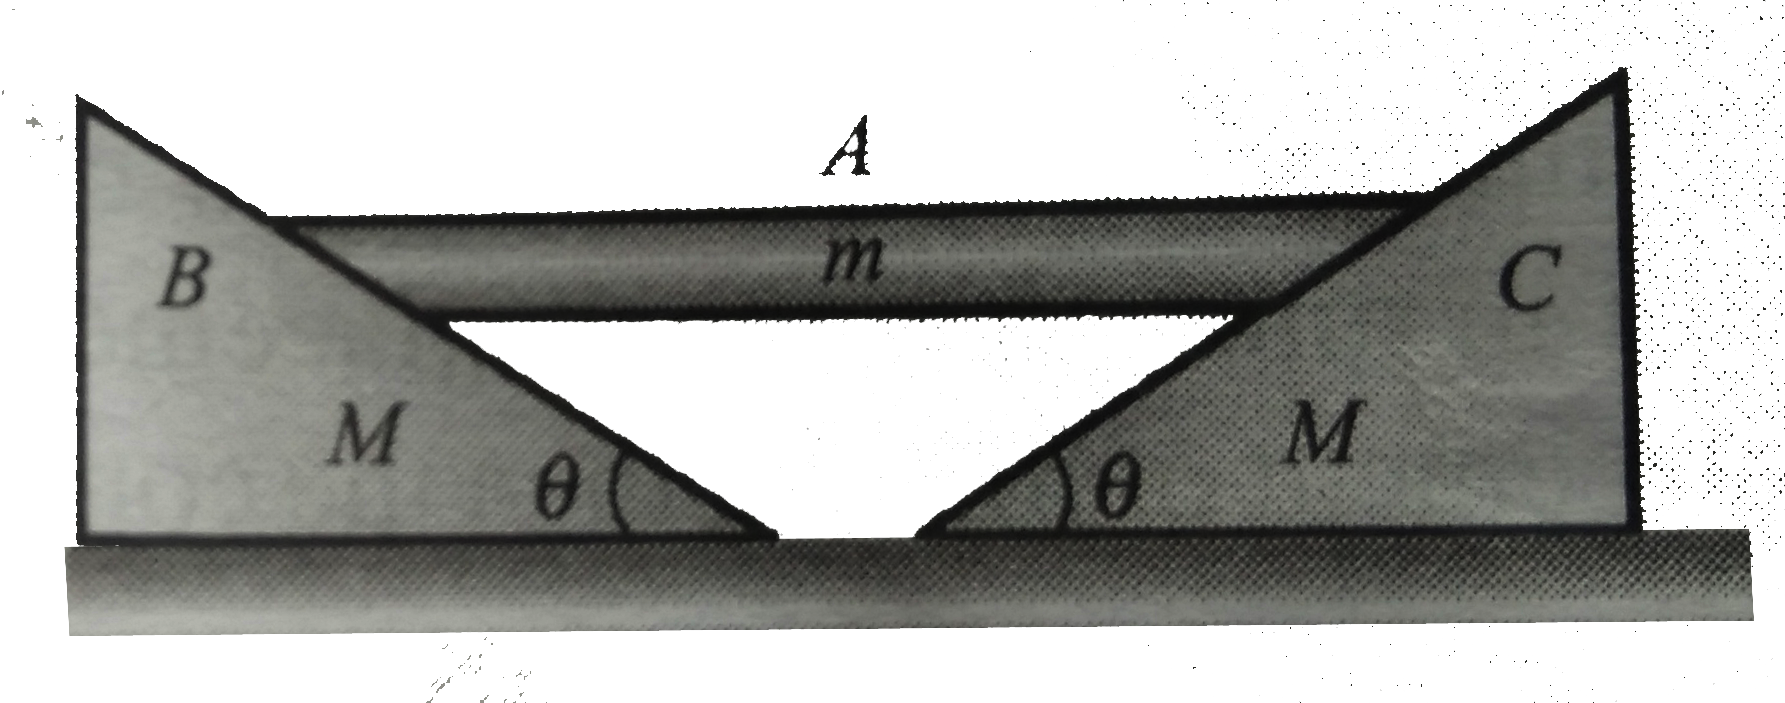 A plank of mass m rests symmetrically on two wedges B and C of mass M. What is the acceleration of the plank? Neglect friction between all the contact surfaces.